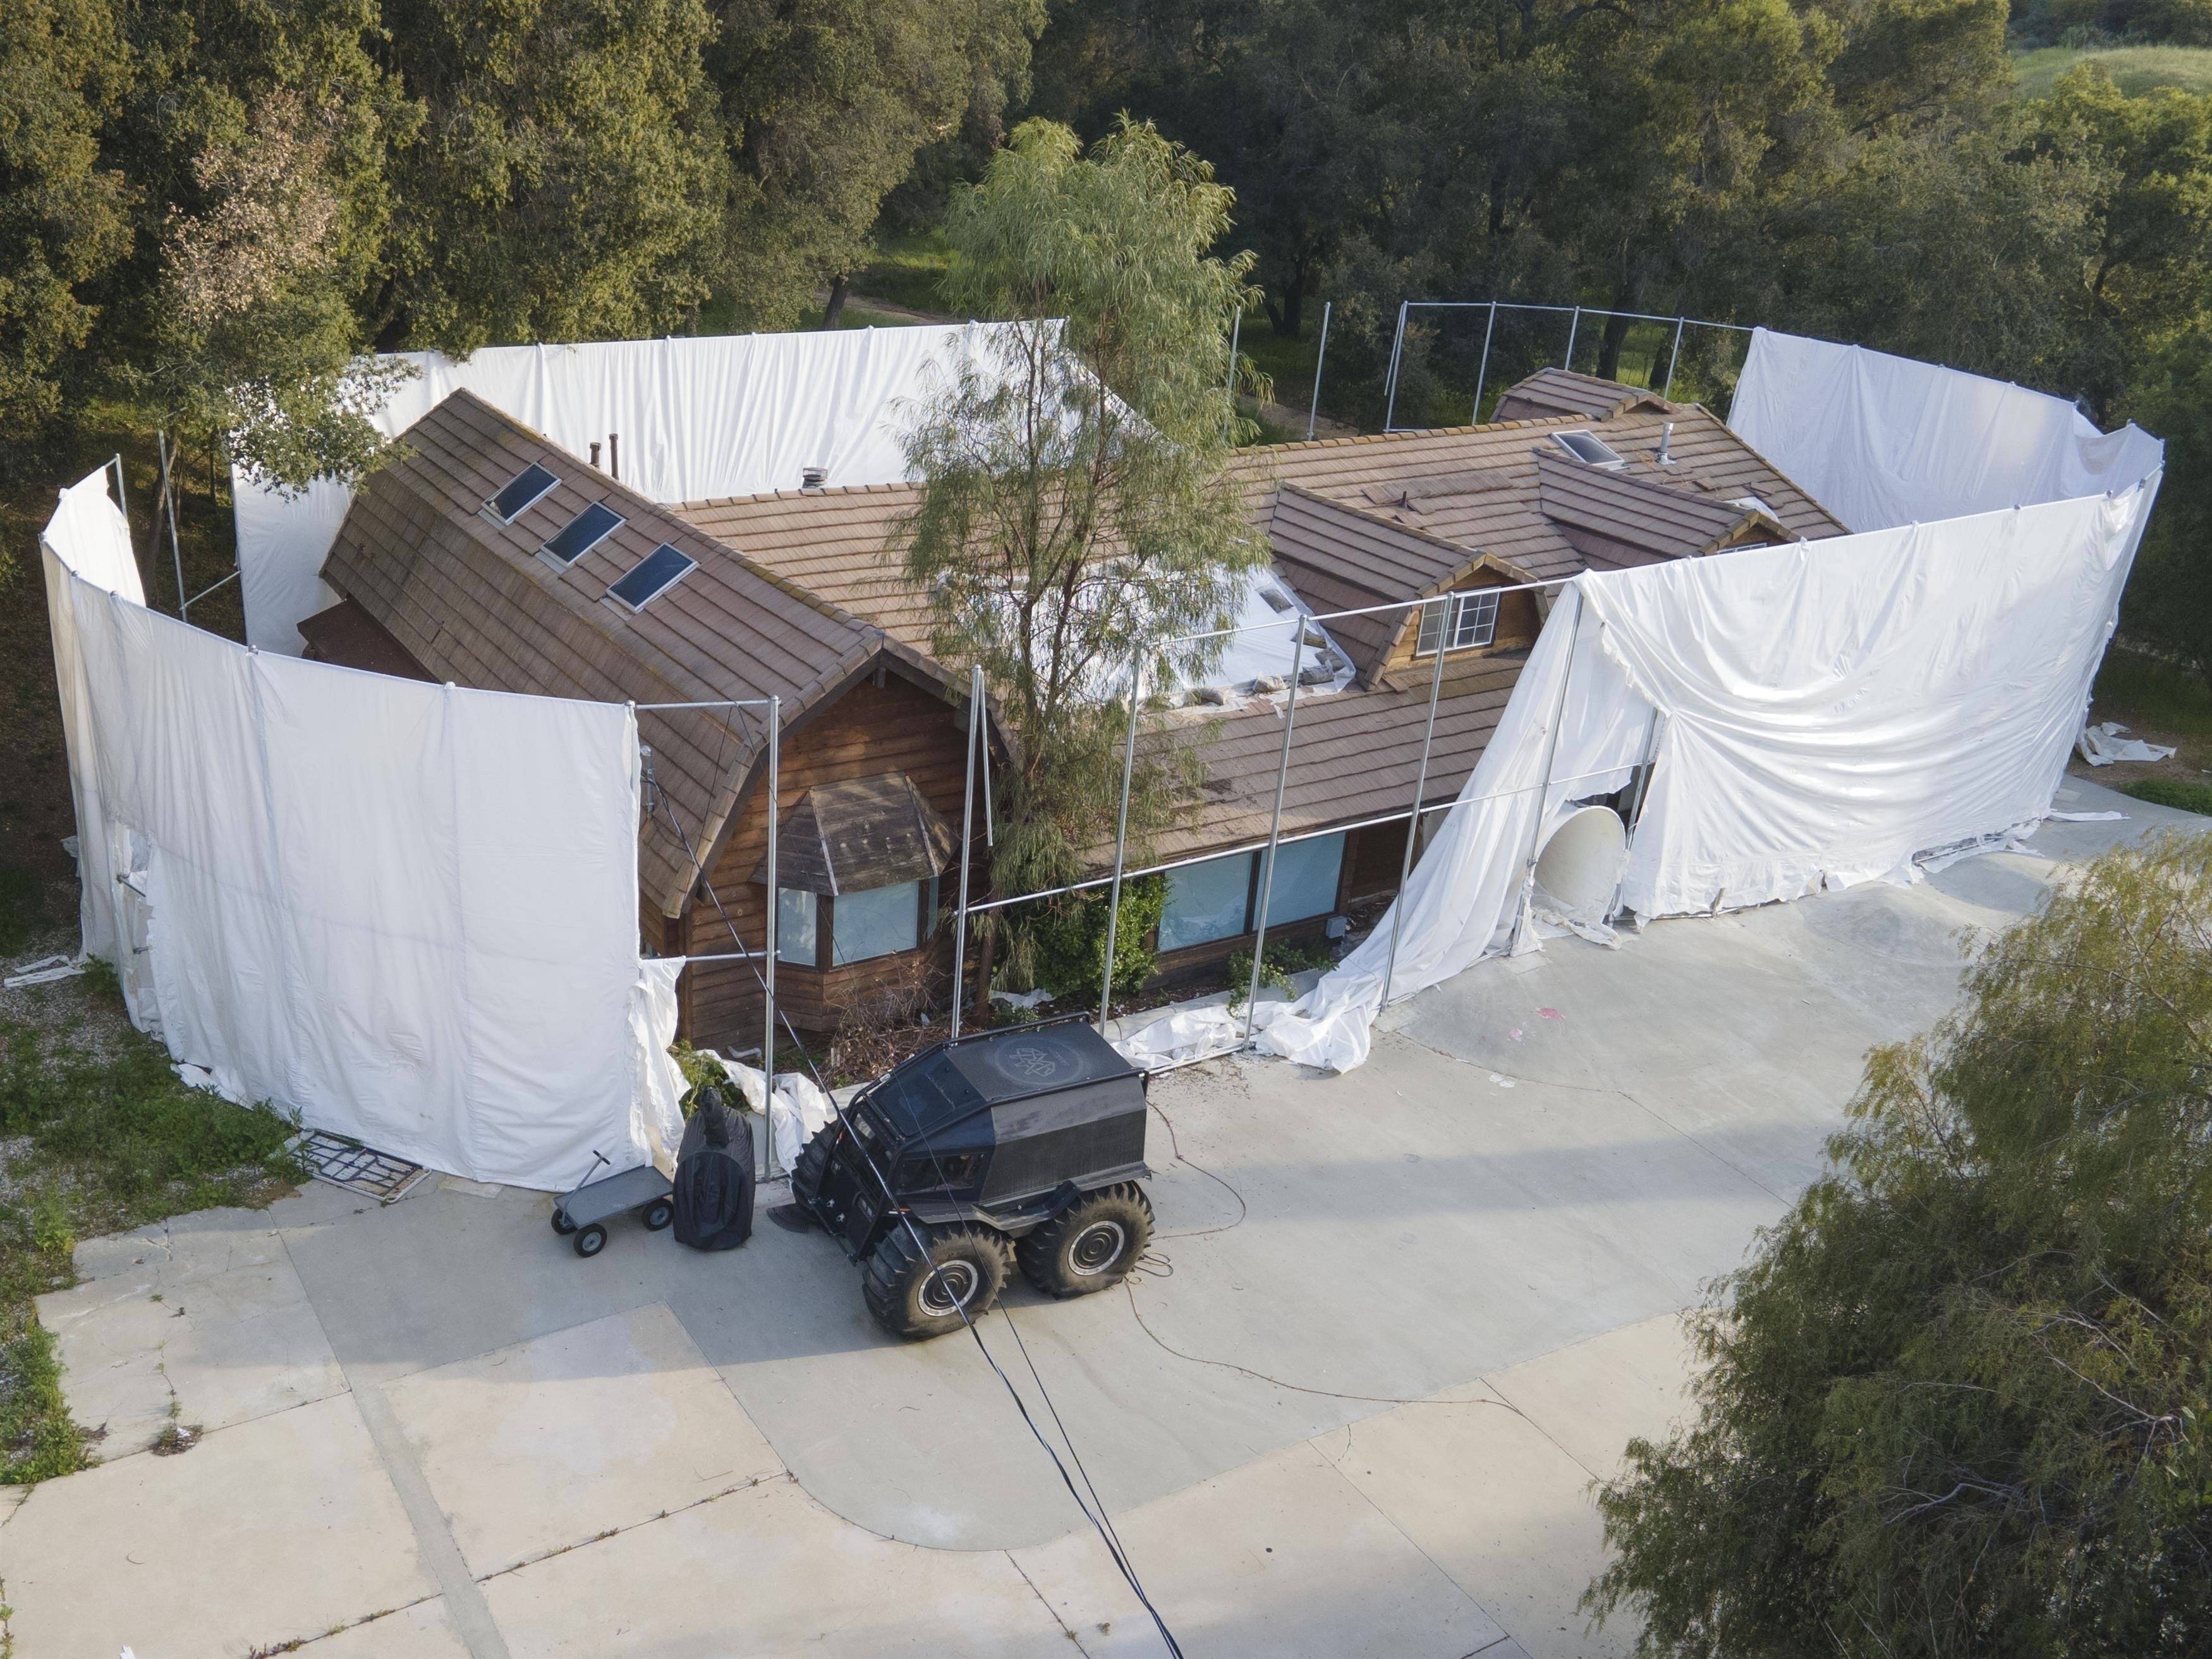 Neighbors are also annoyed about Kanye leaving his LA ranch property in a mess